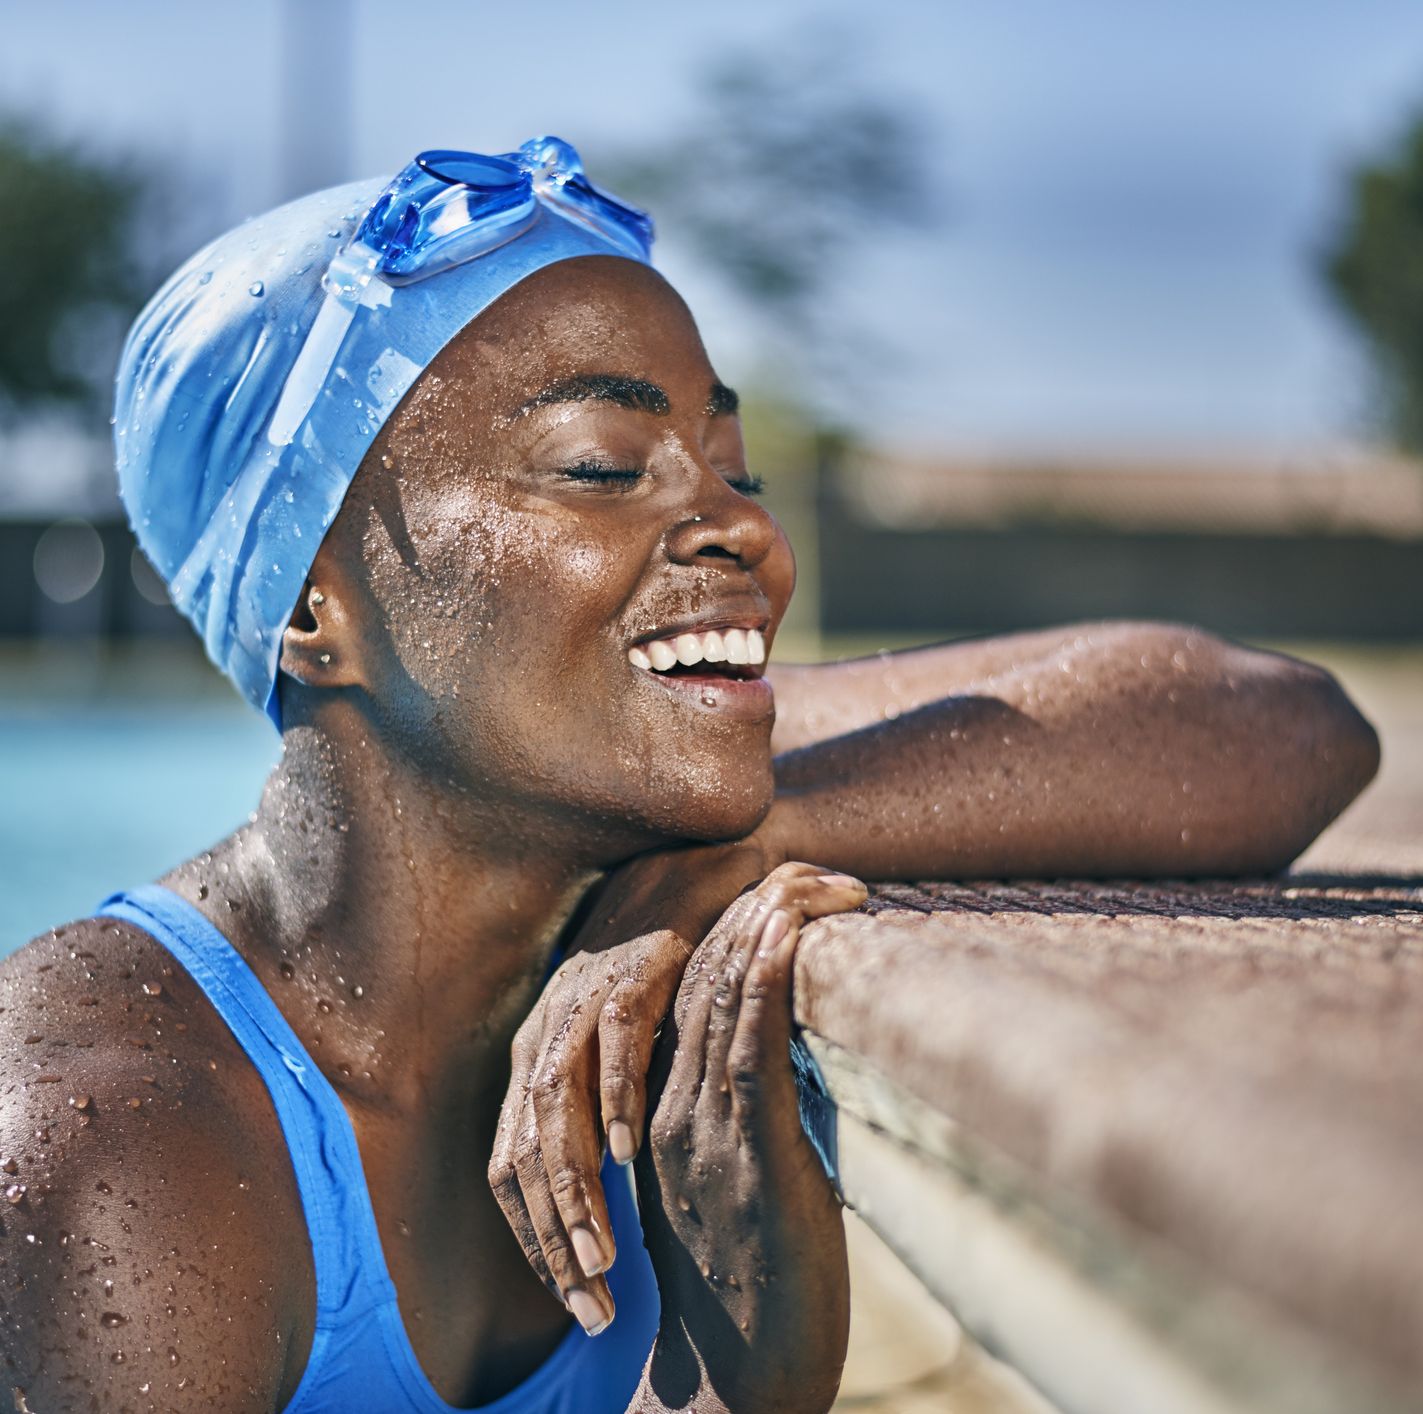 when will swimming pools reopen, women's health uk